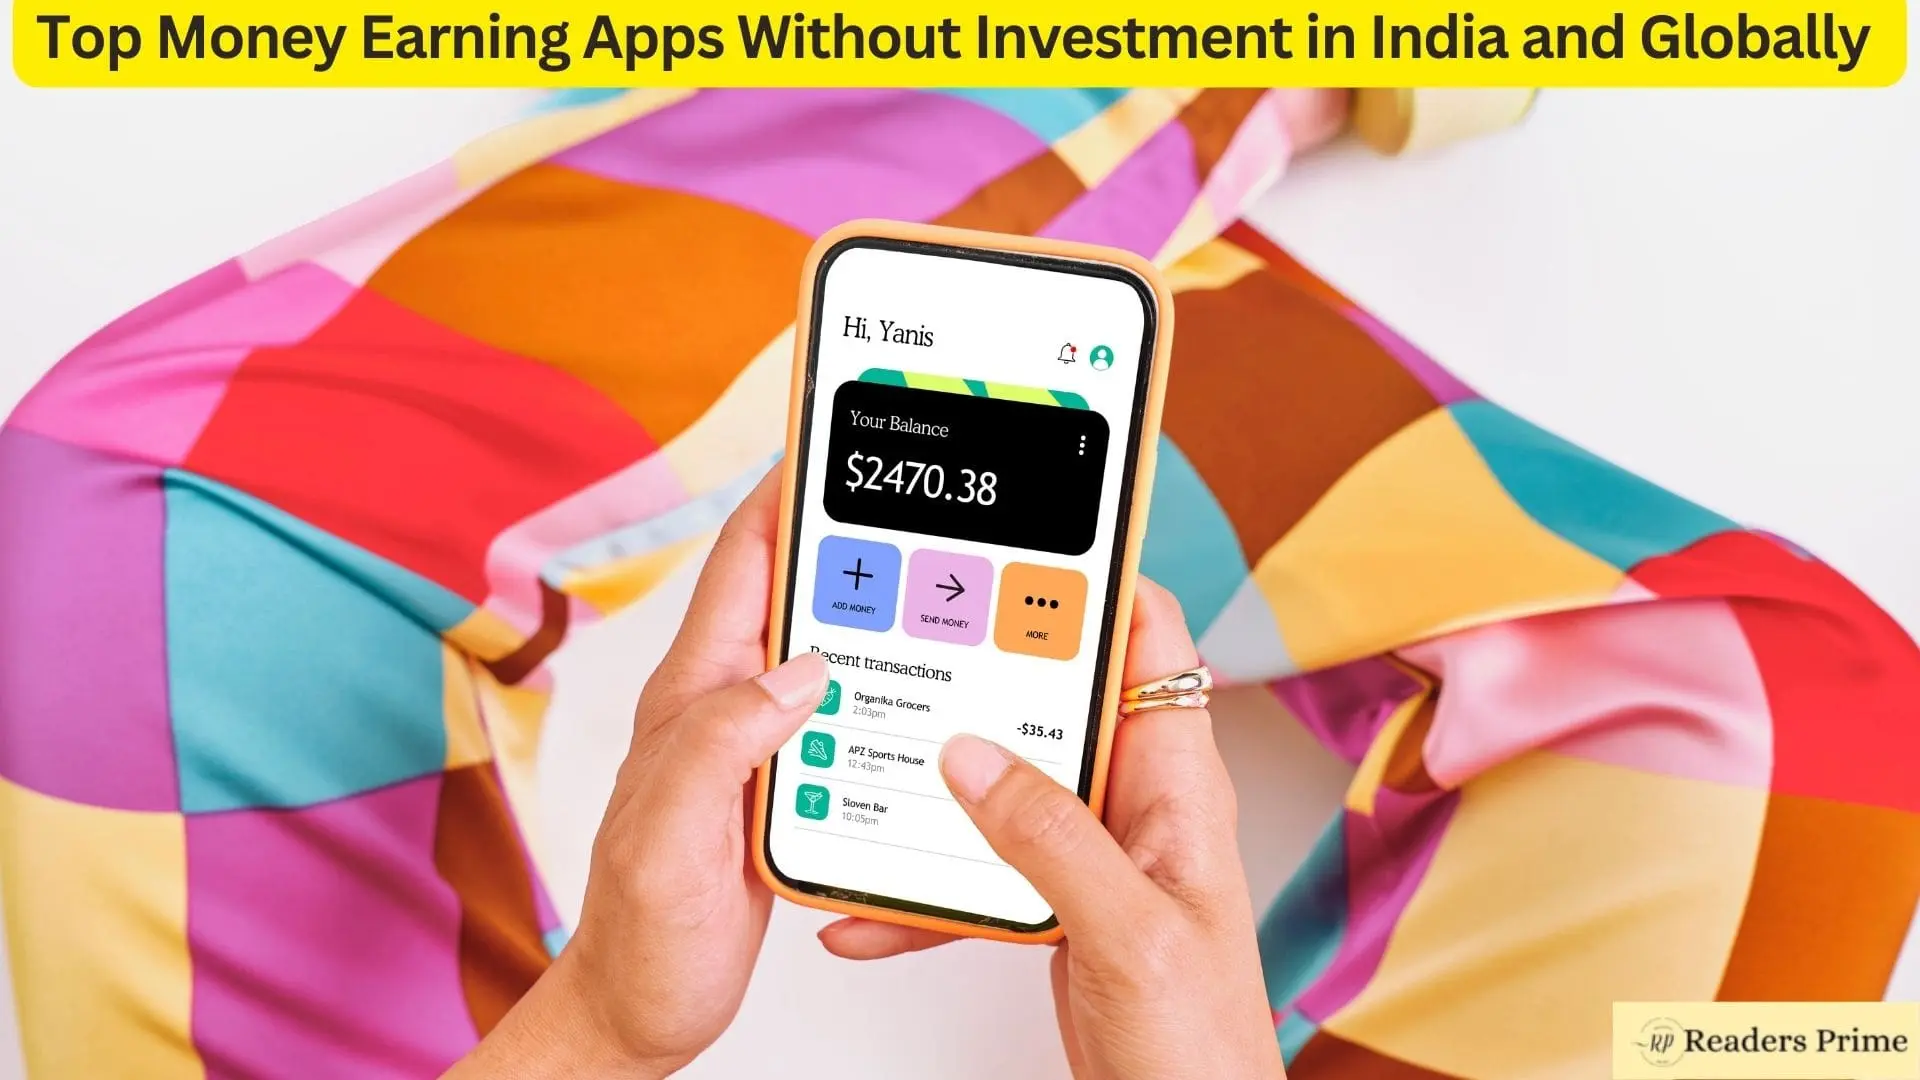 Top Money Earning Apps Without Investment in India and Globally